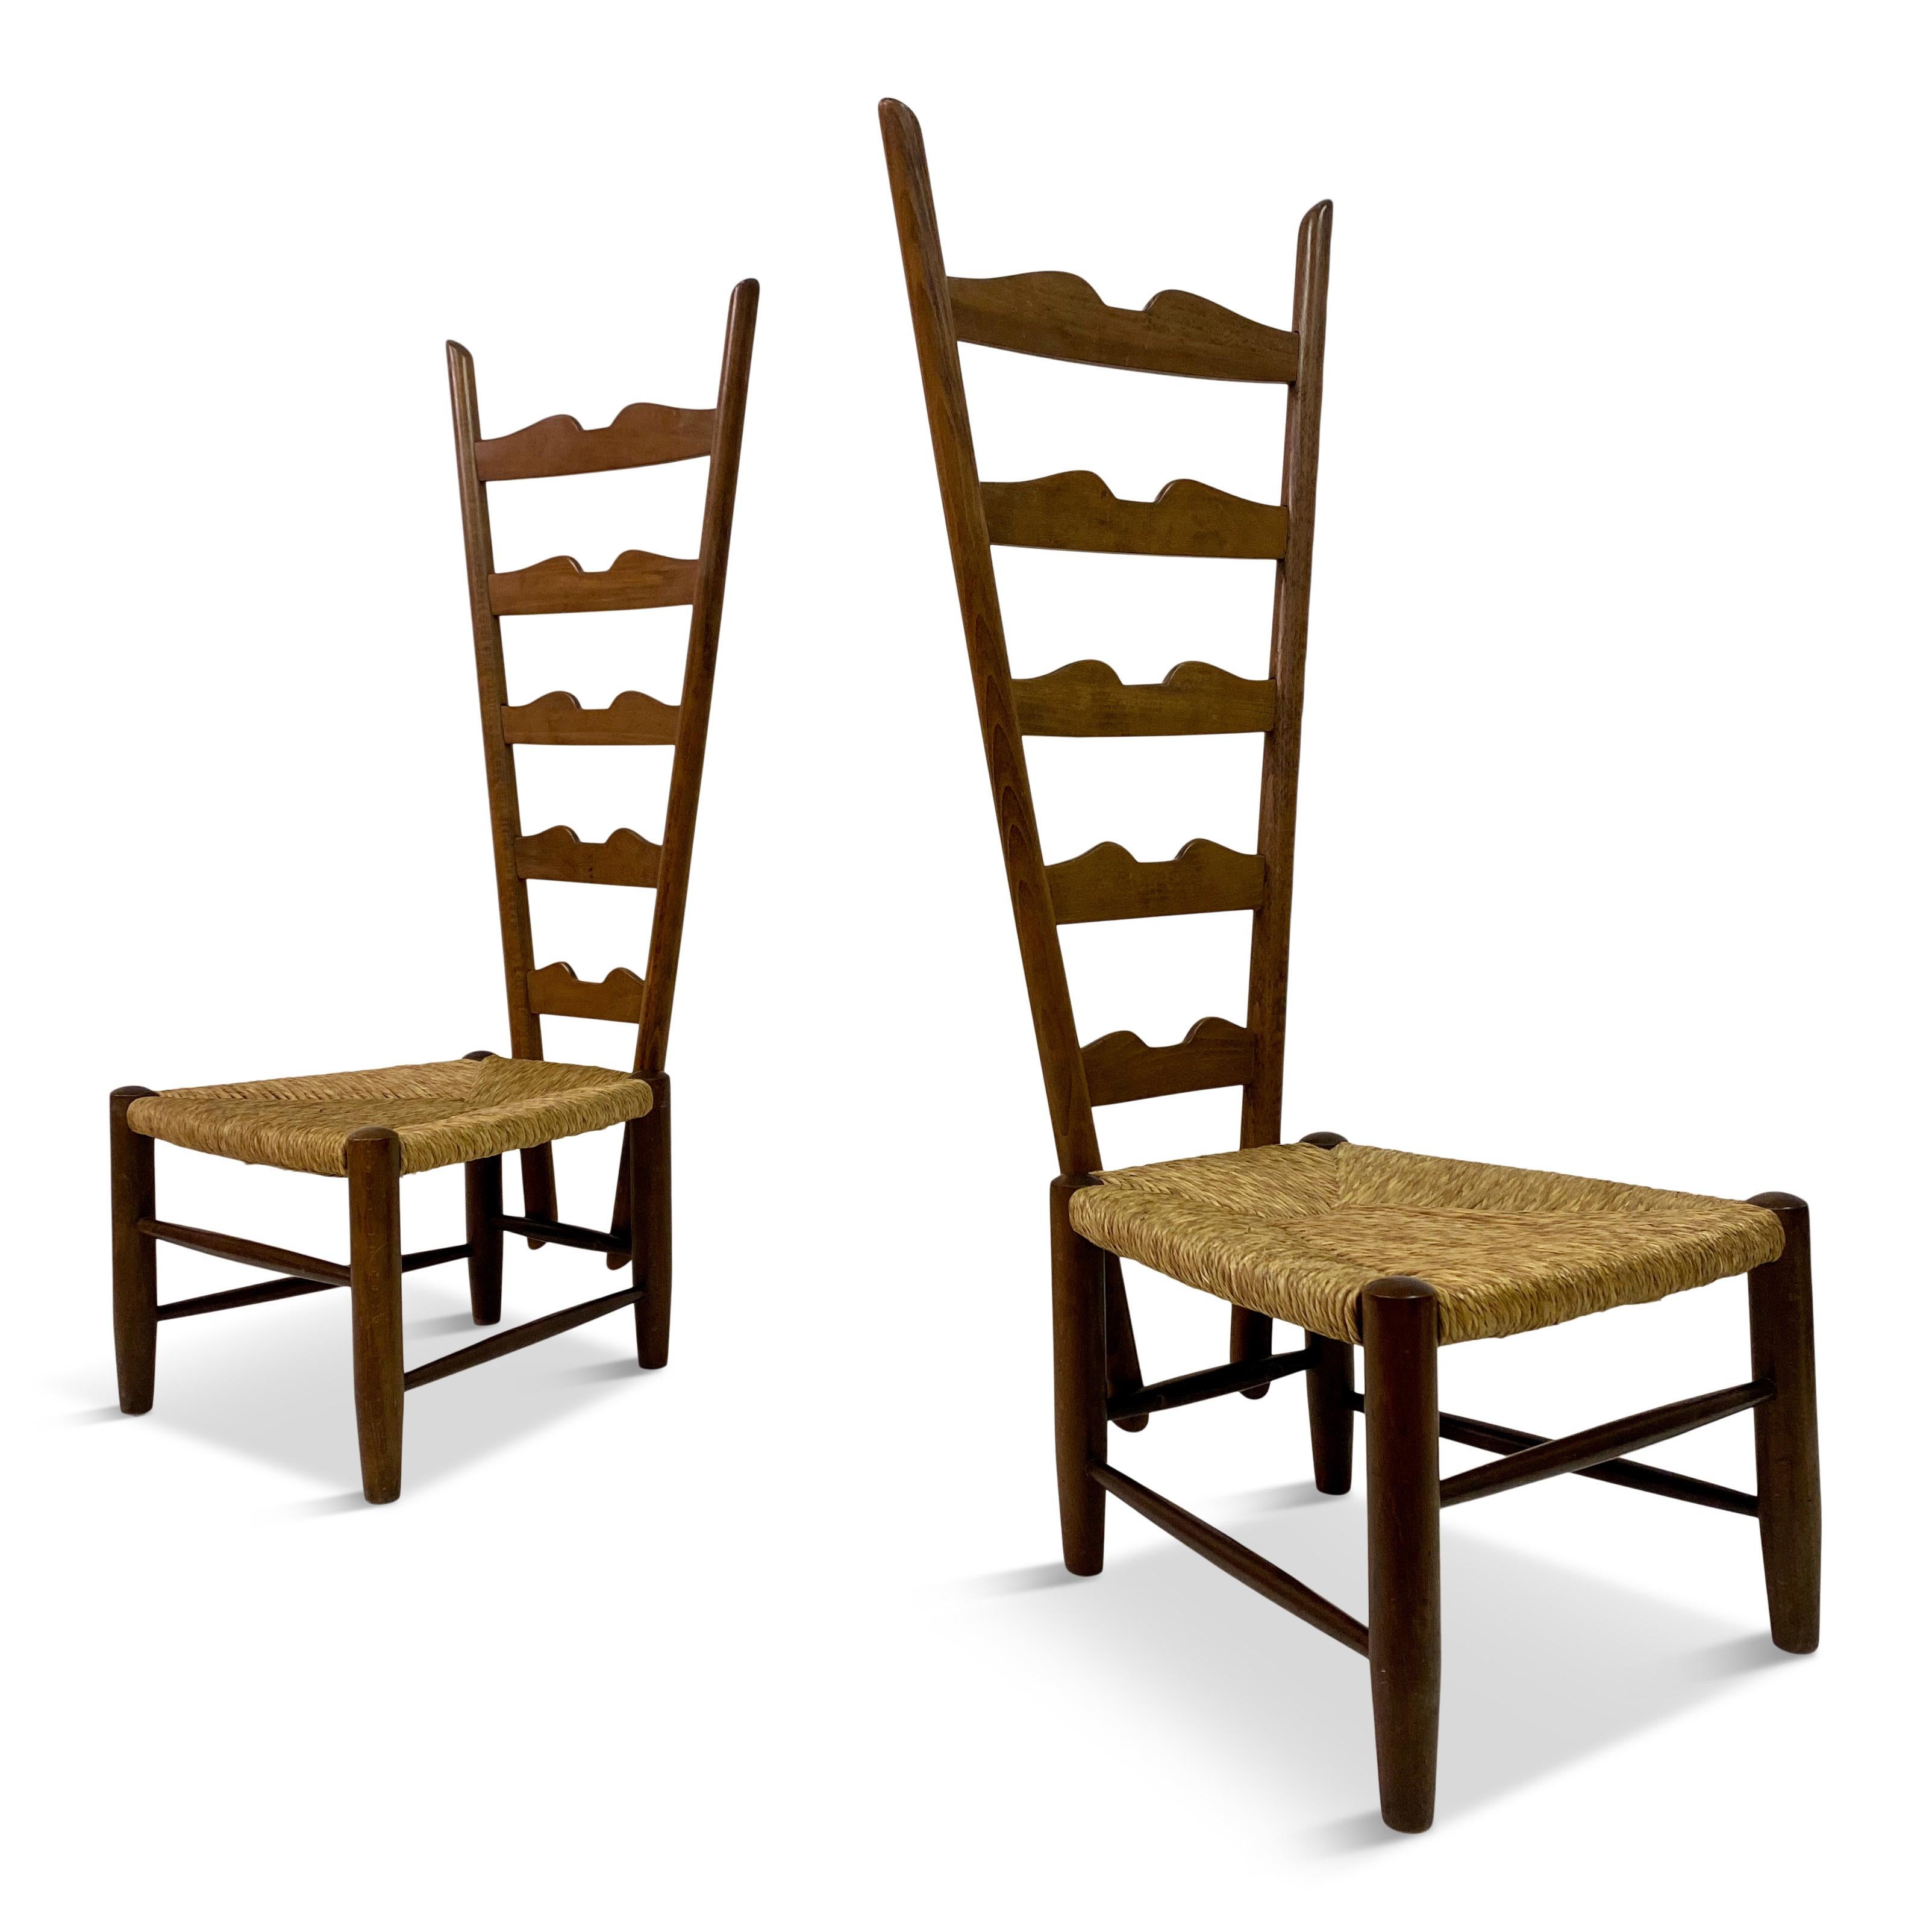 Pair of fireside chairs

By Gio Ponti

For Casa e Giardino

Rush seats

High backs

Seat height 30cm

Italy Mid 20th century.